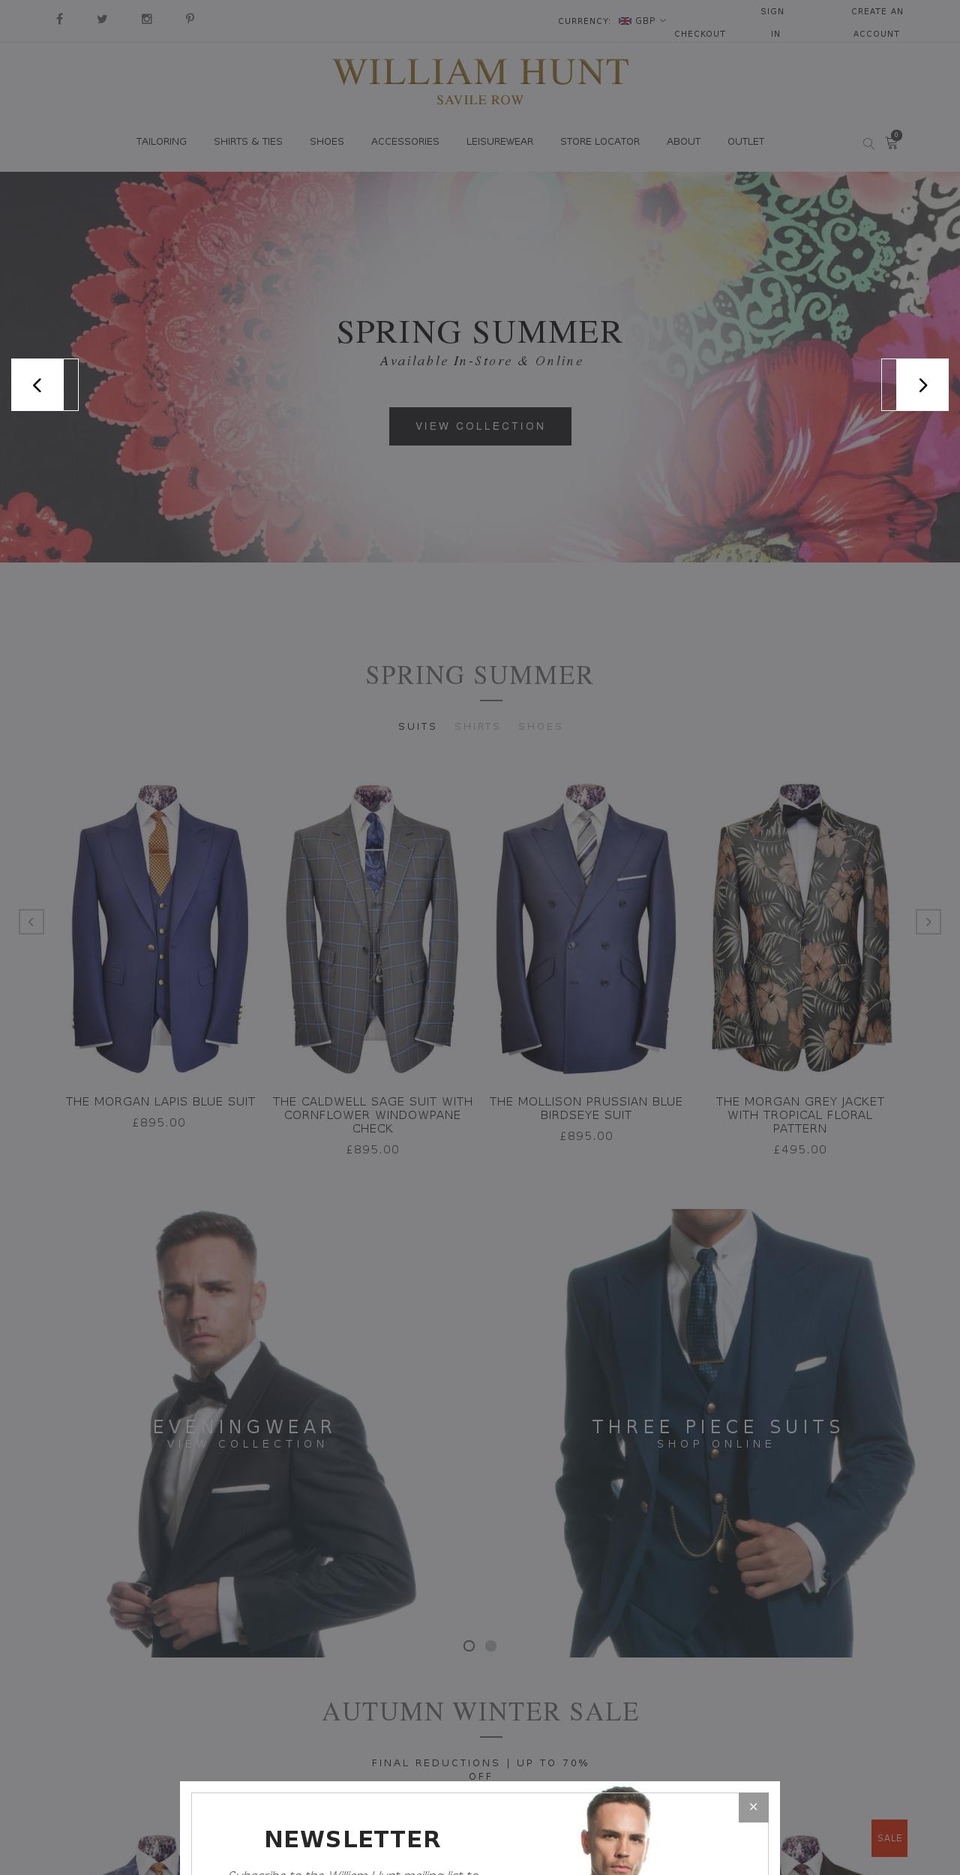 Debut Shopify theme site example williamhunt.co.uk